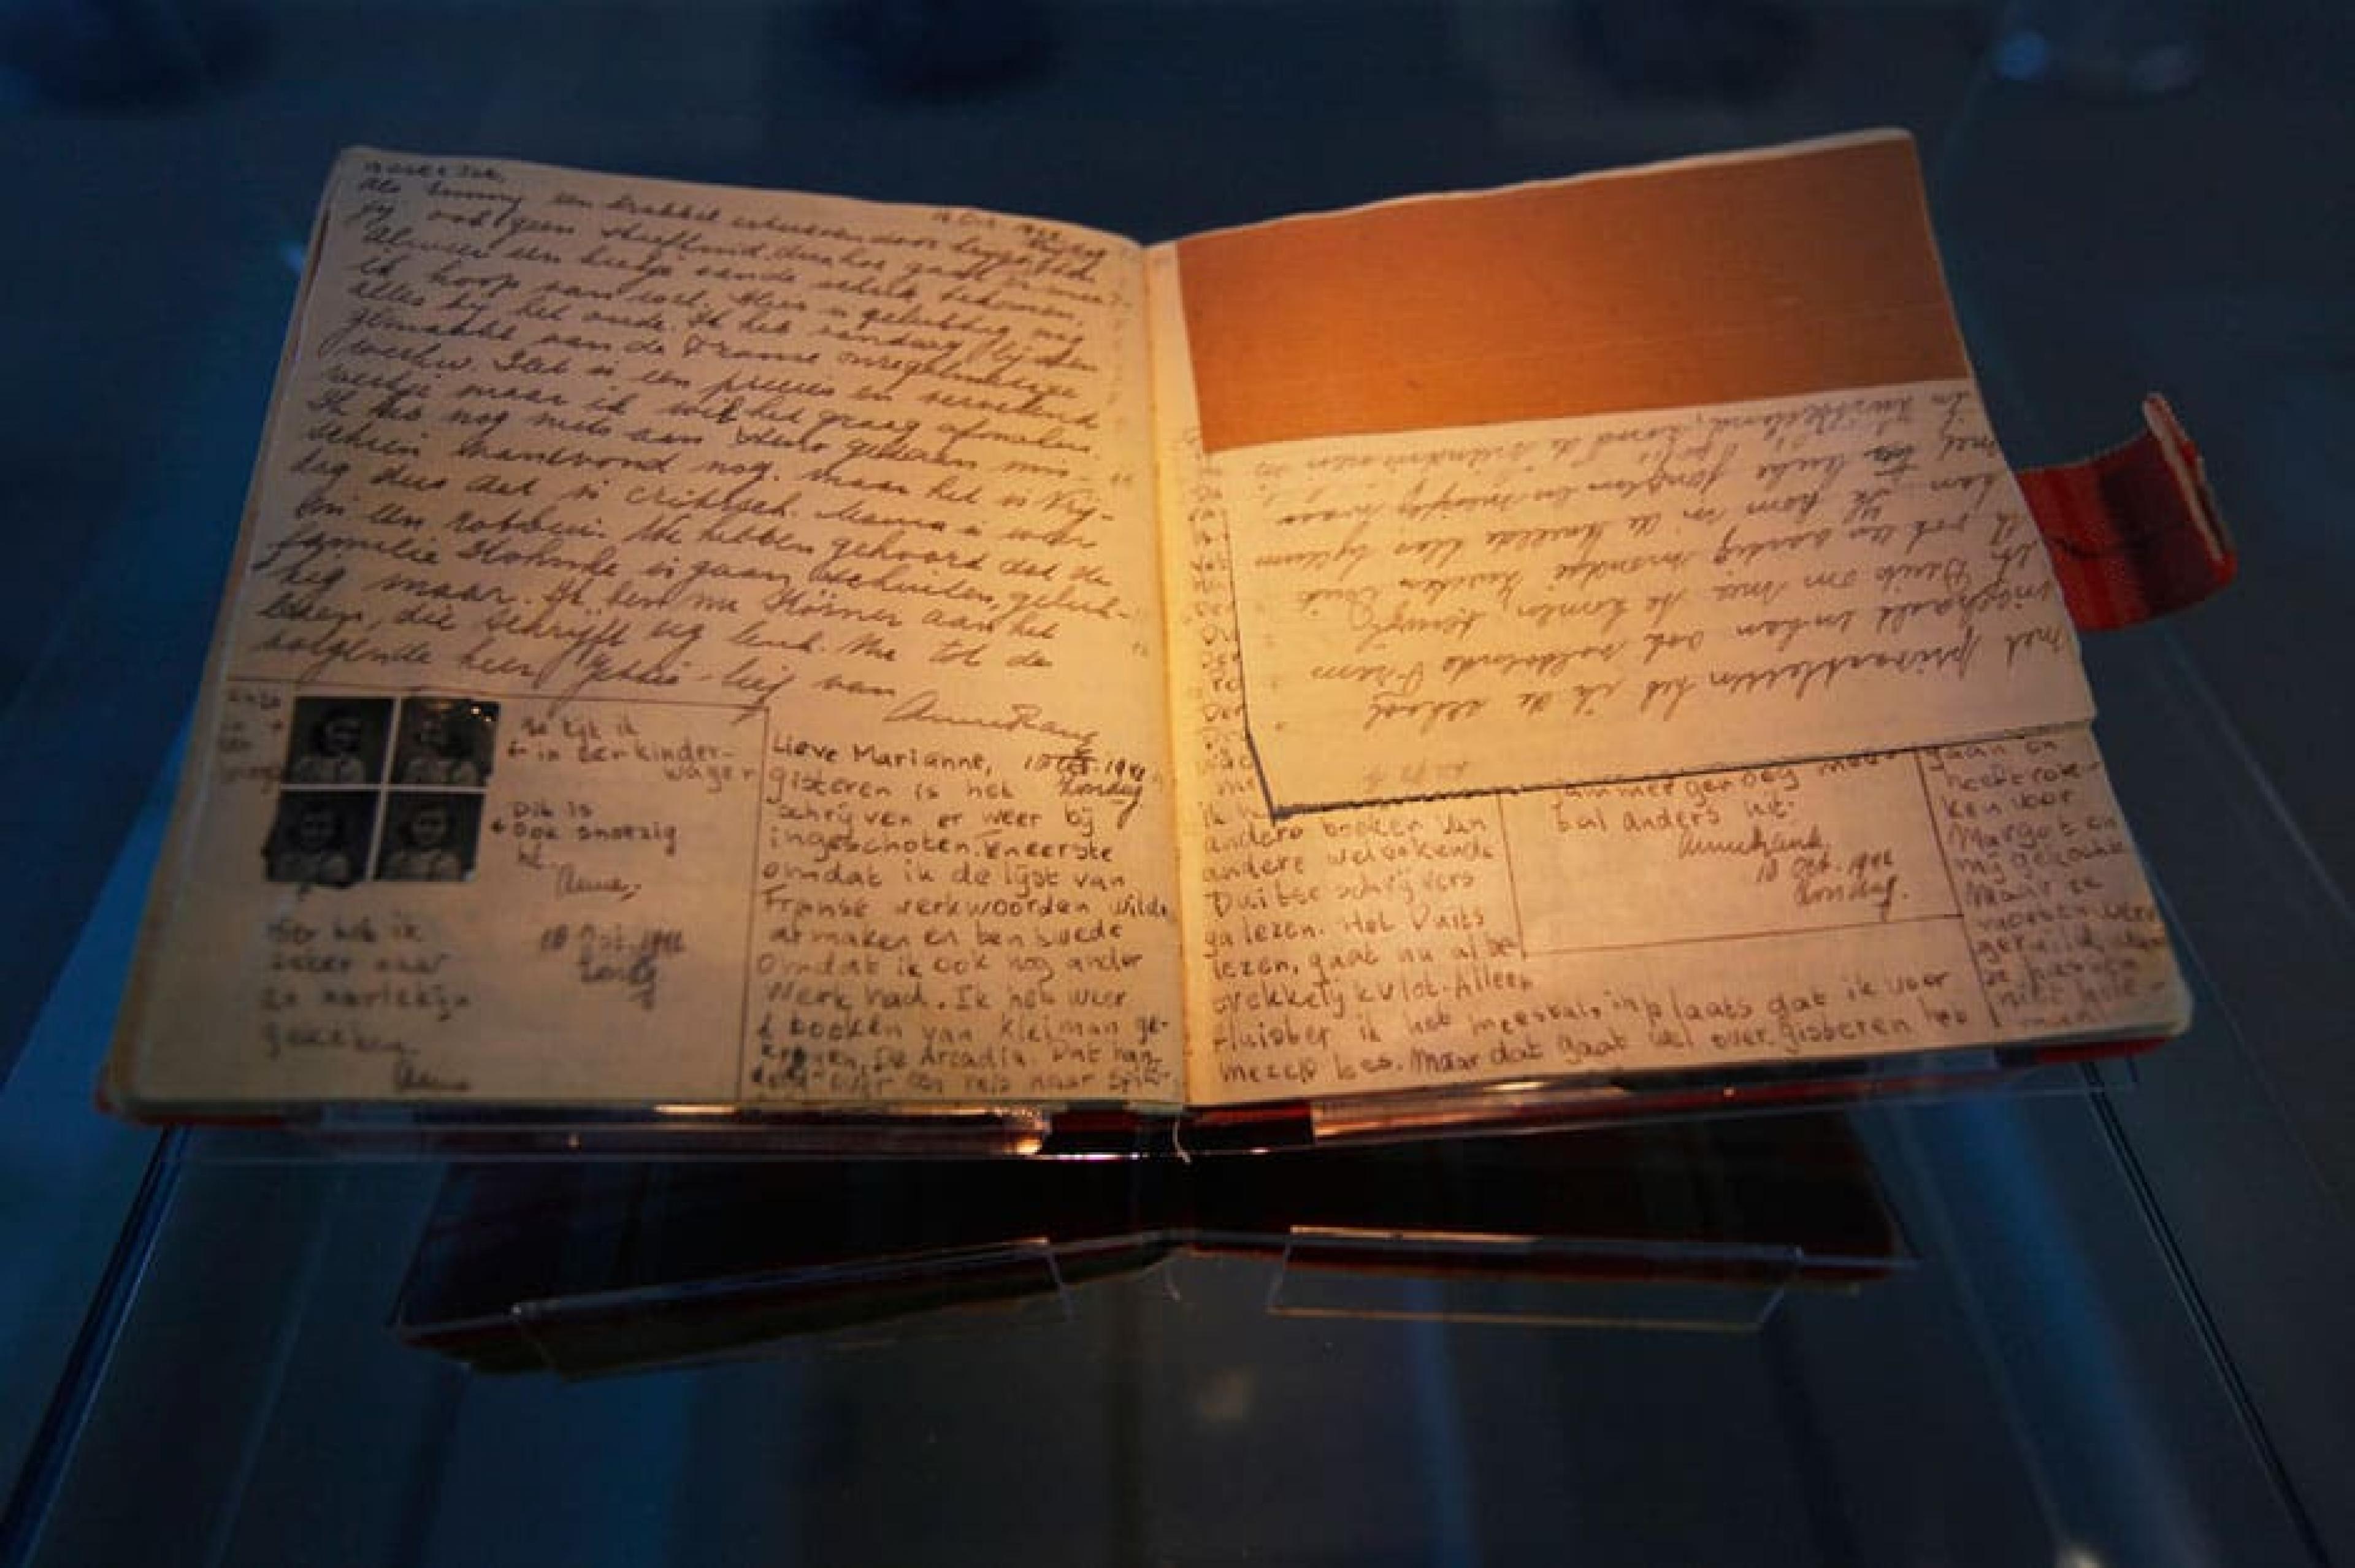 Diary of Anne Frank in Anne Frank Huis at Amsterdam, Netherlands